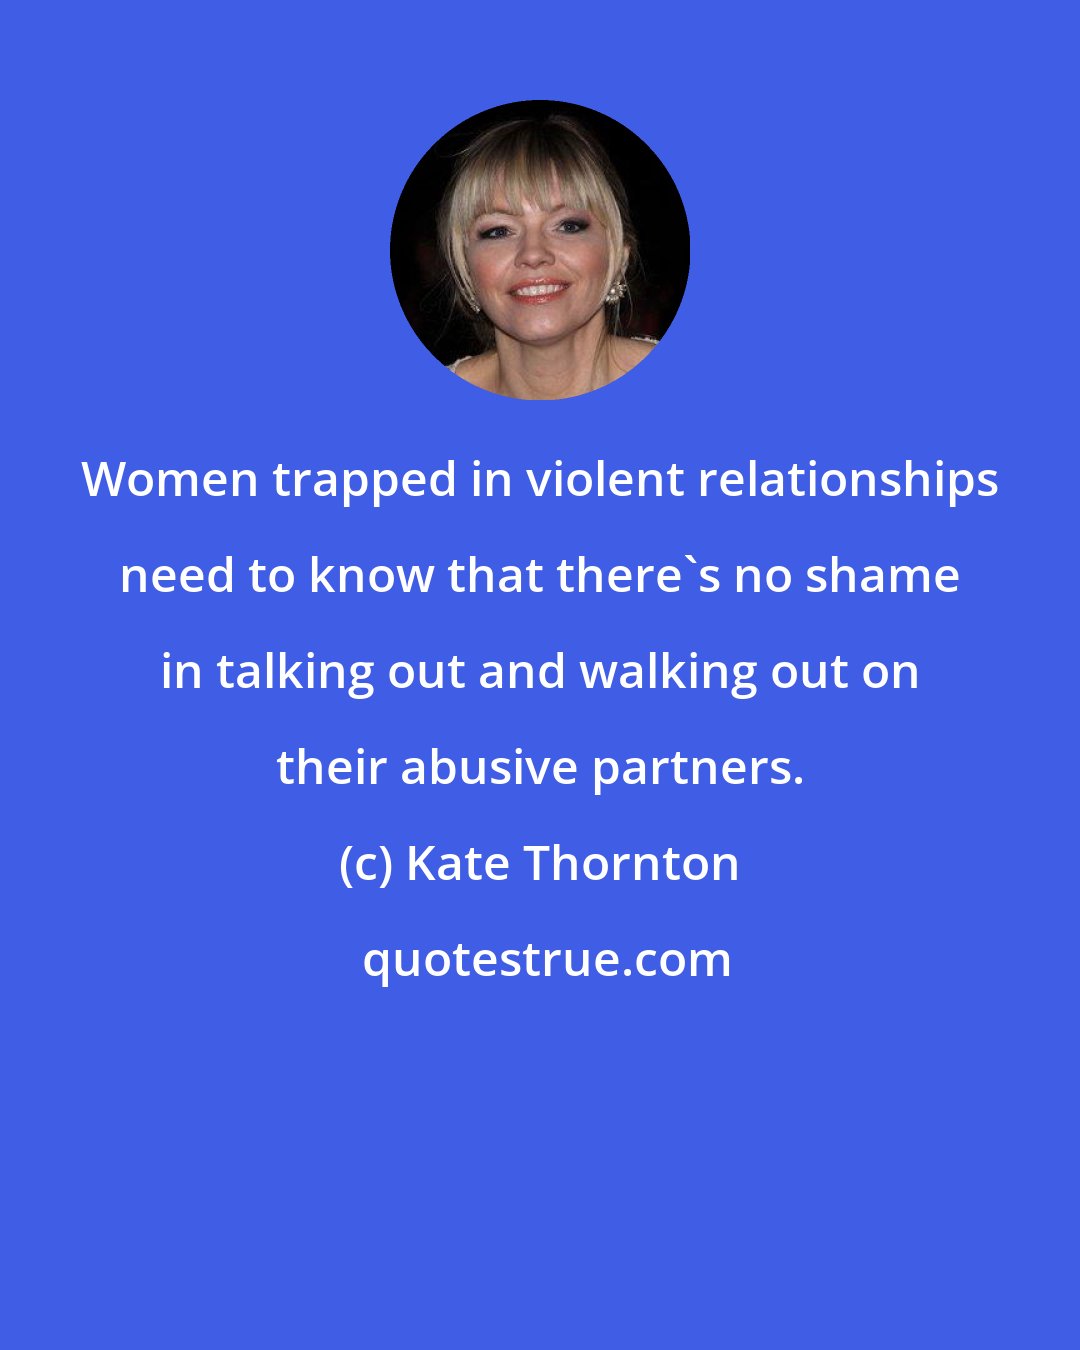 Kate Thornton: Women trapped in violent relationships need to know that there's no shame in talking out and walking out on their abusive partners.